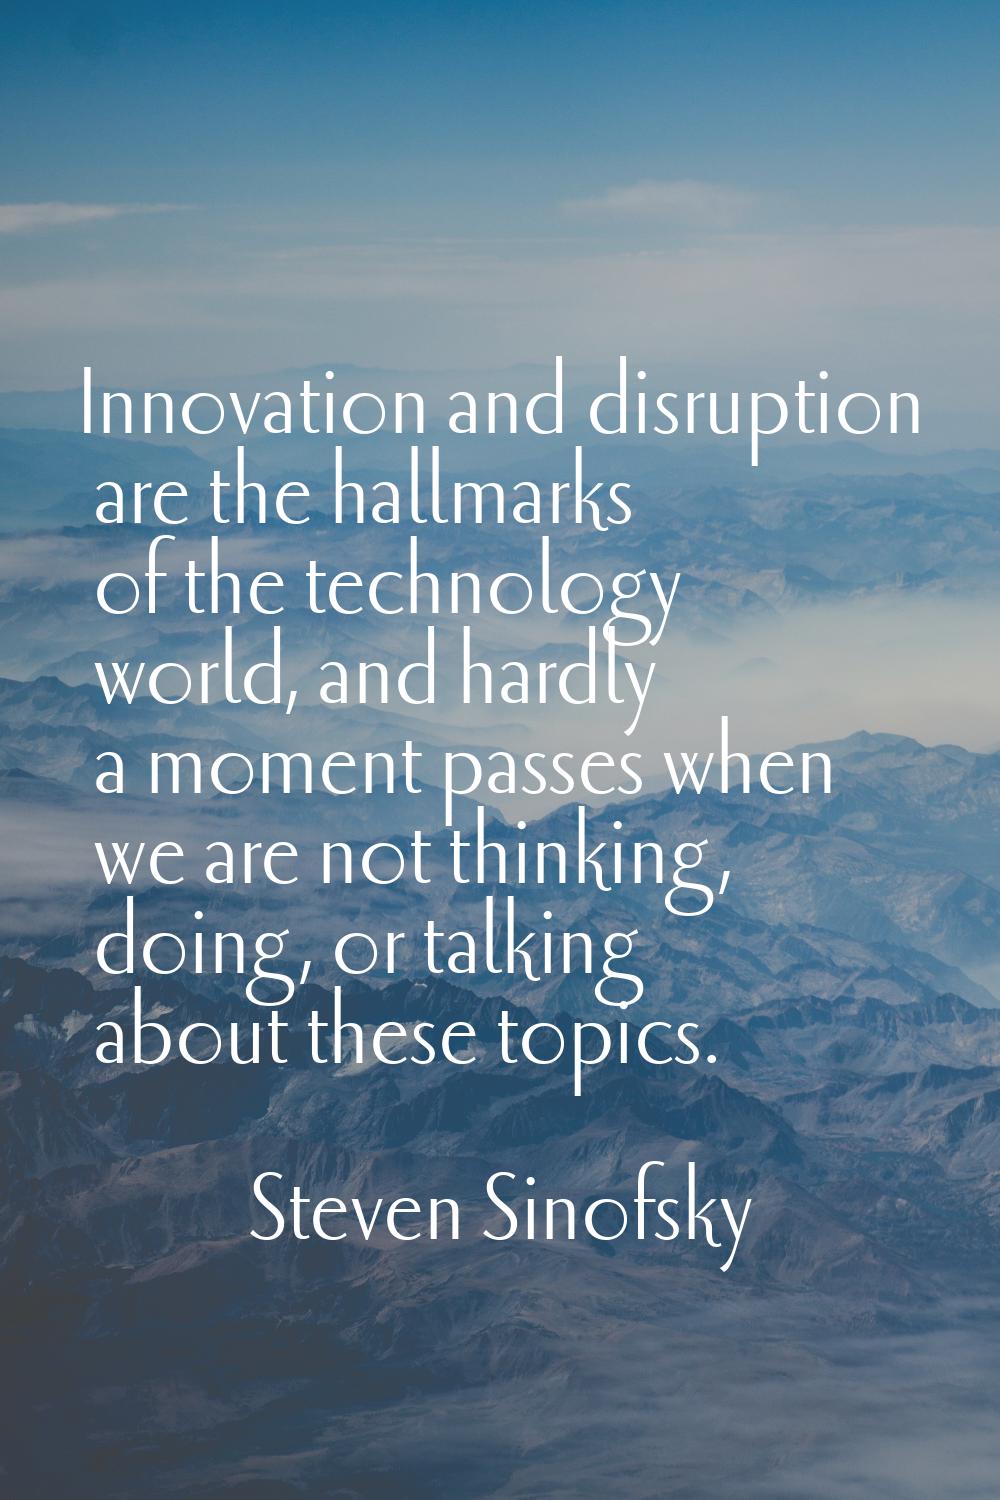 Innovation and disruption are the hallmarks of the technology world, and hardly a moment passes whe